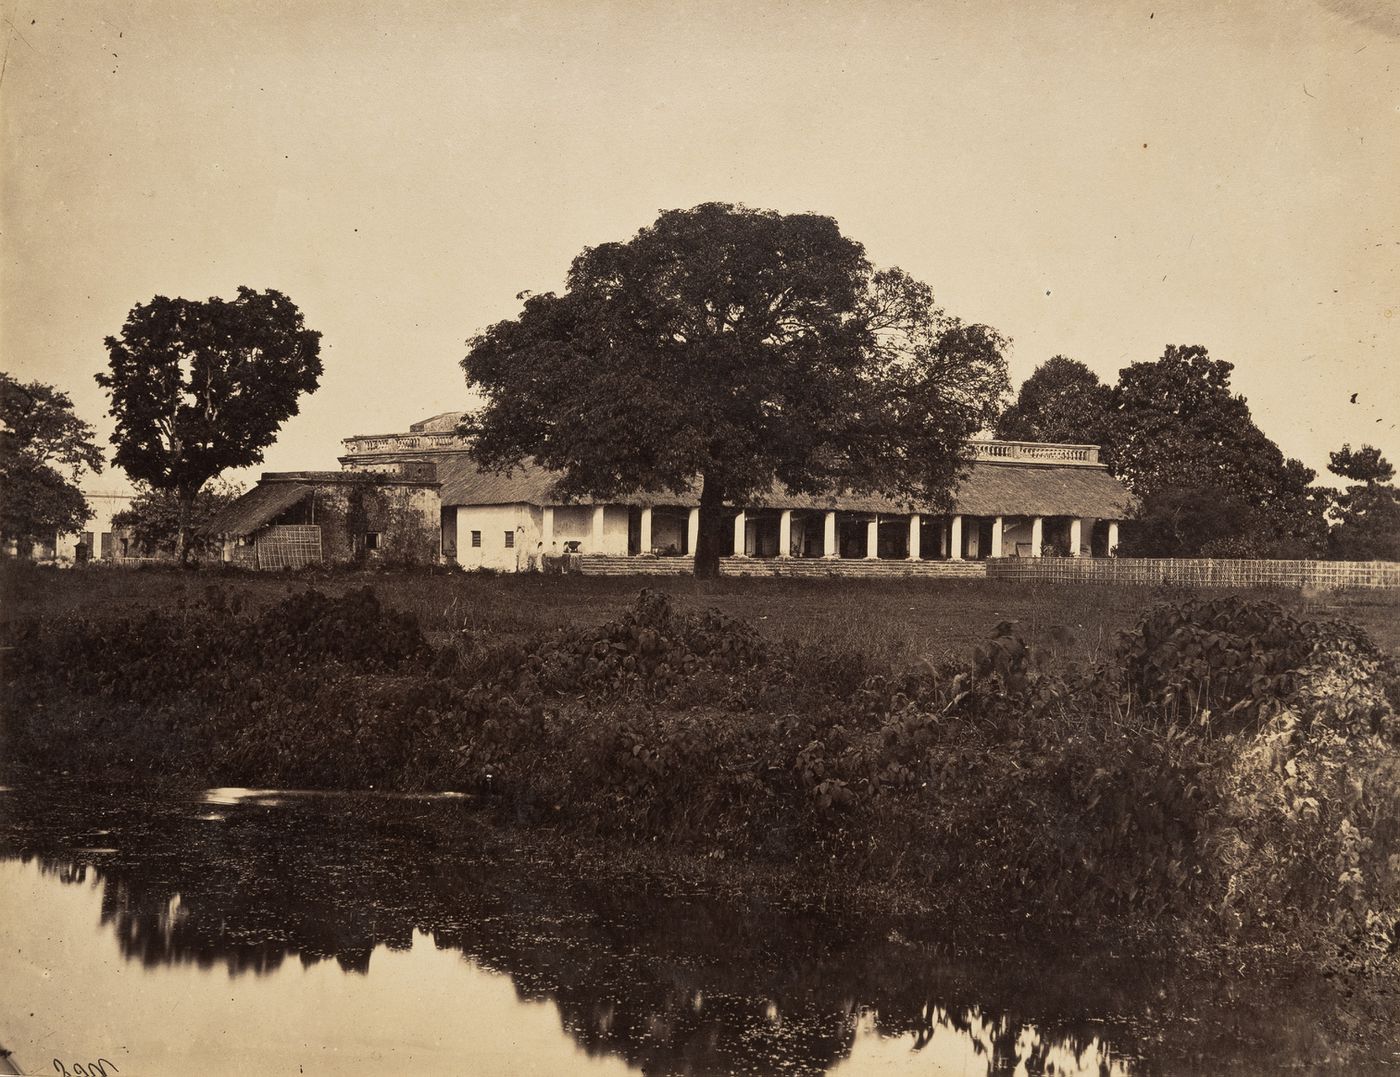 View of a Bungalow, Sylhet, India (now in Bangladesh)